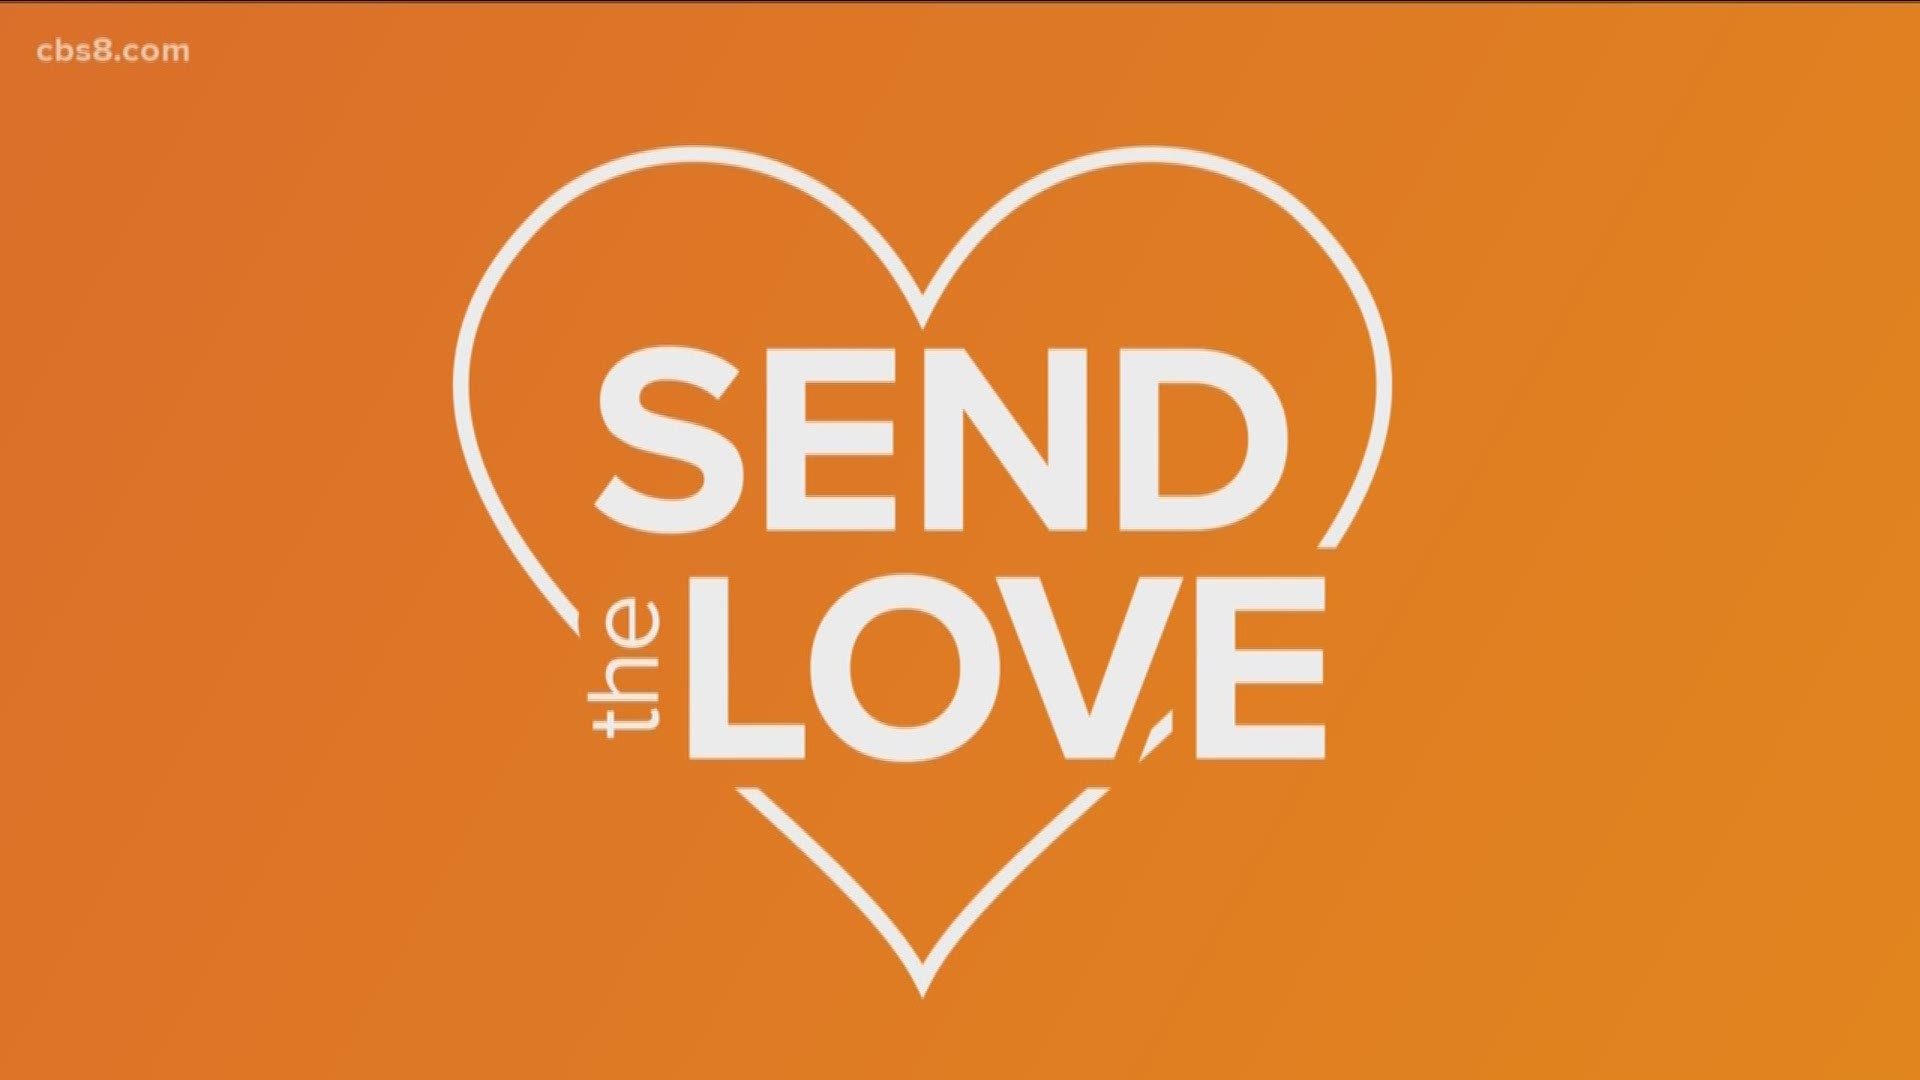 We want you to send the love so we can share it with all of San Diego!